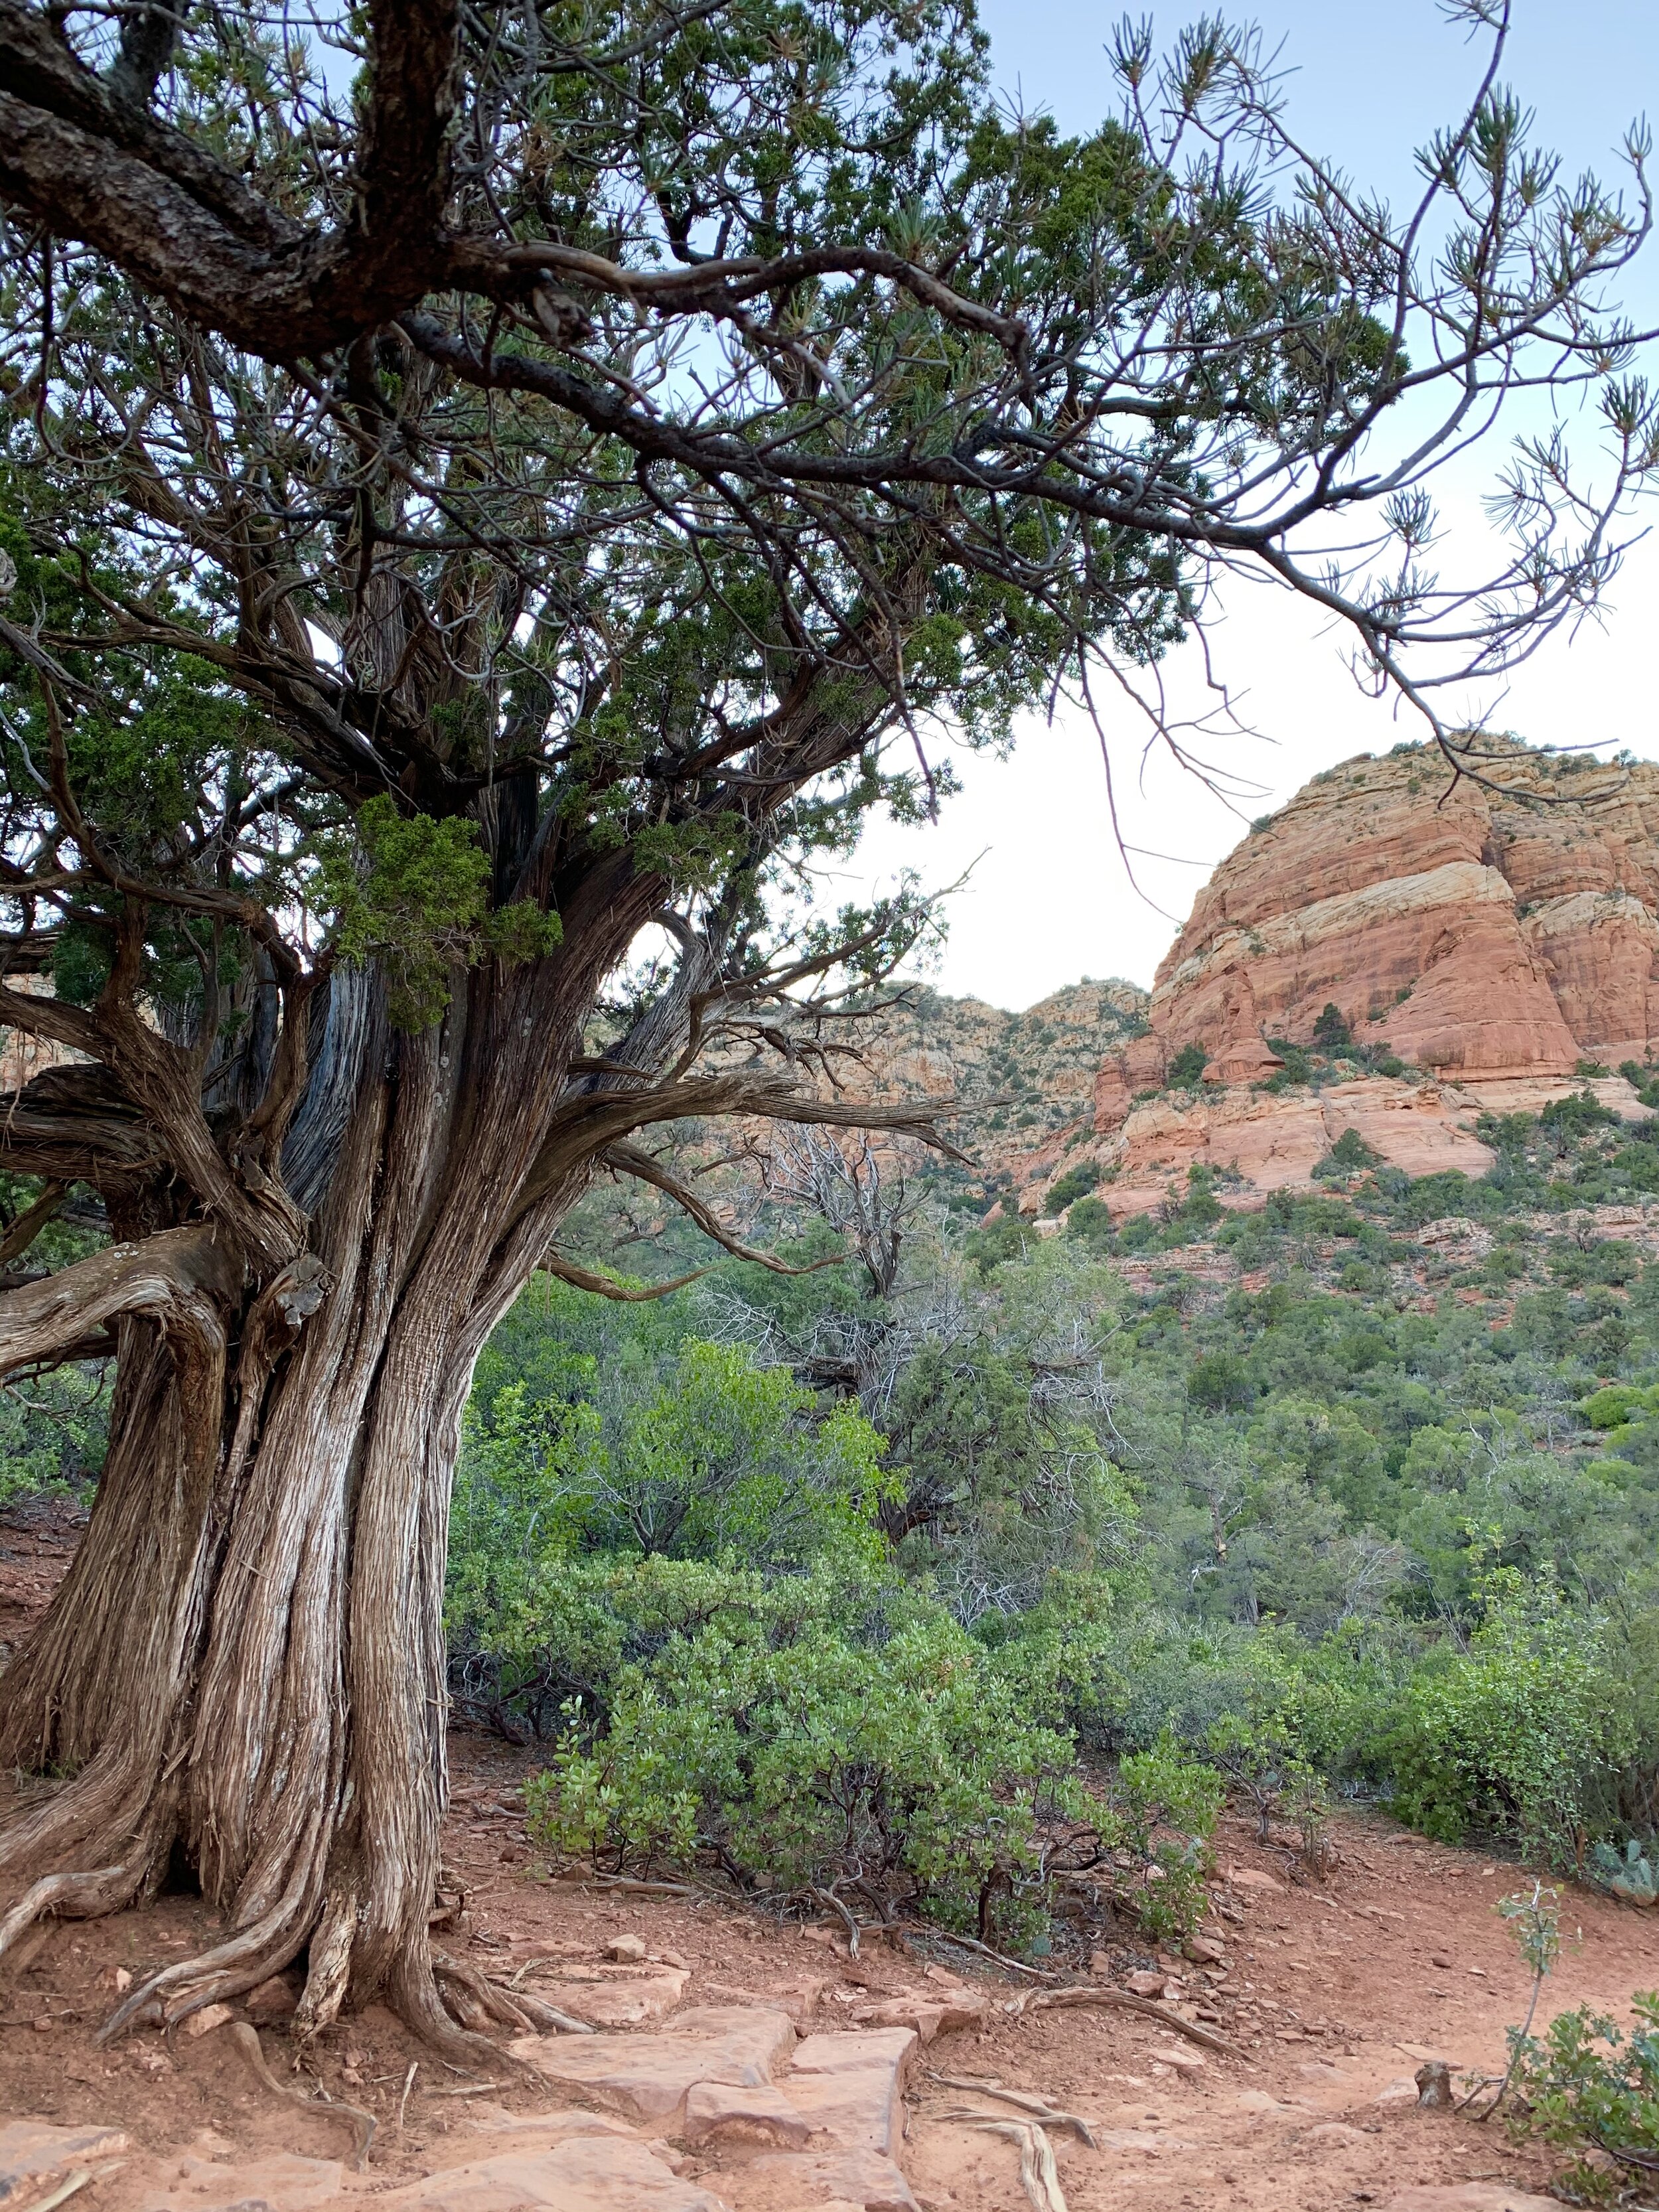  And more Juniper trees. 